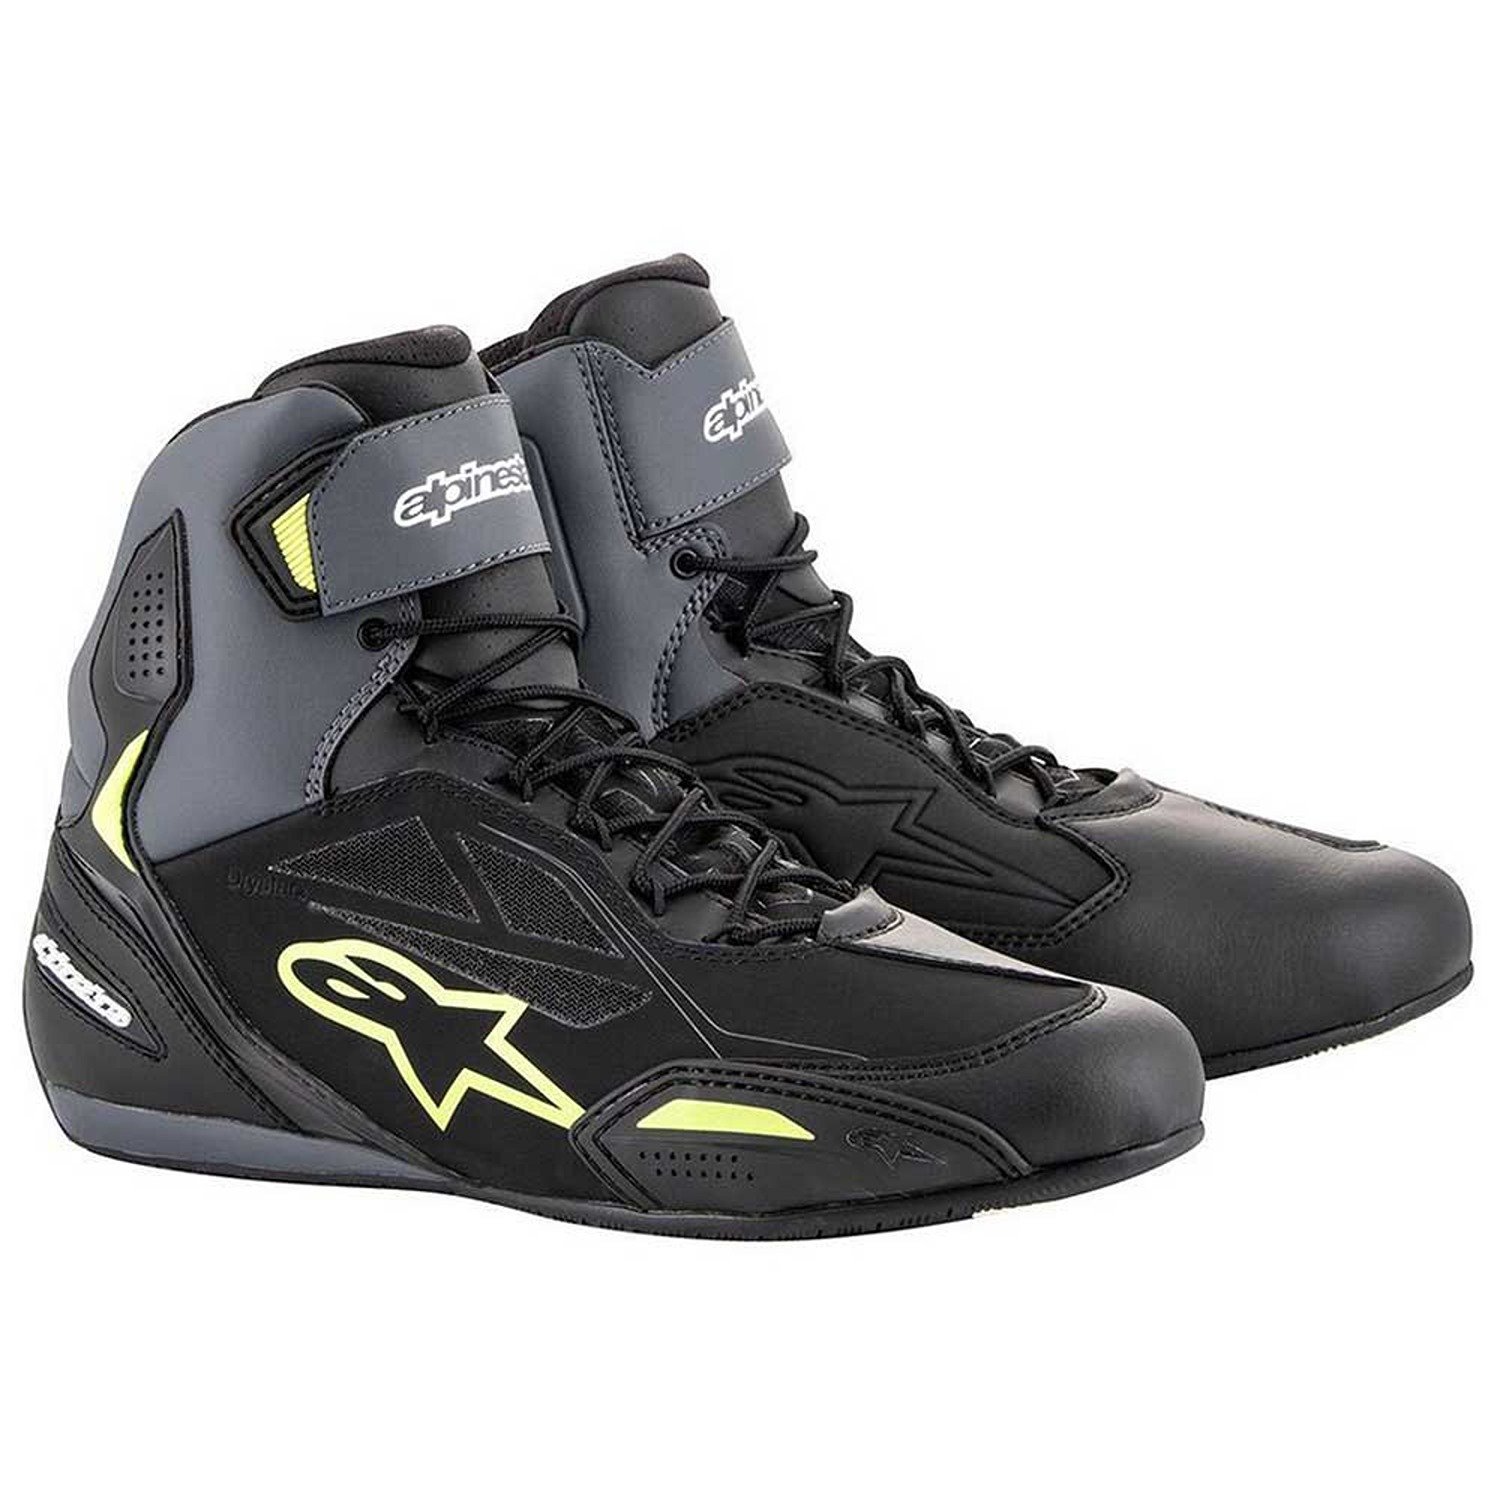 Image of Alpinestars Faster-3 Shoes Black Yellow Fluo Size US 75 ID 8059347331065